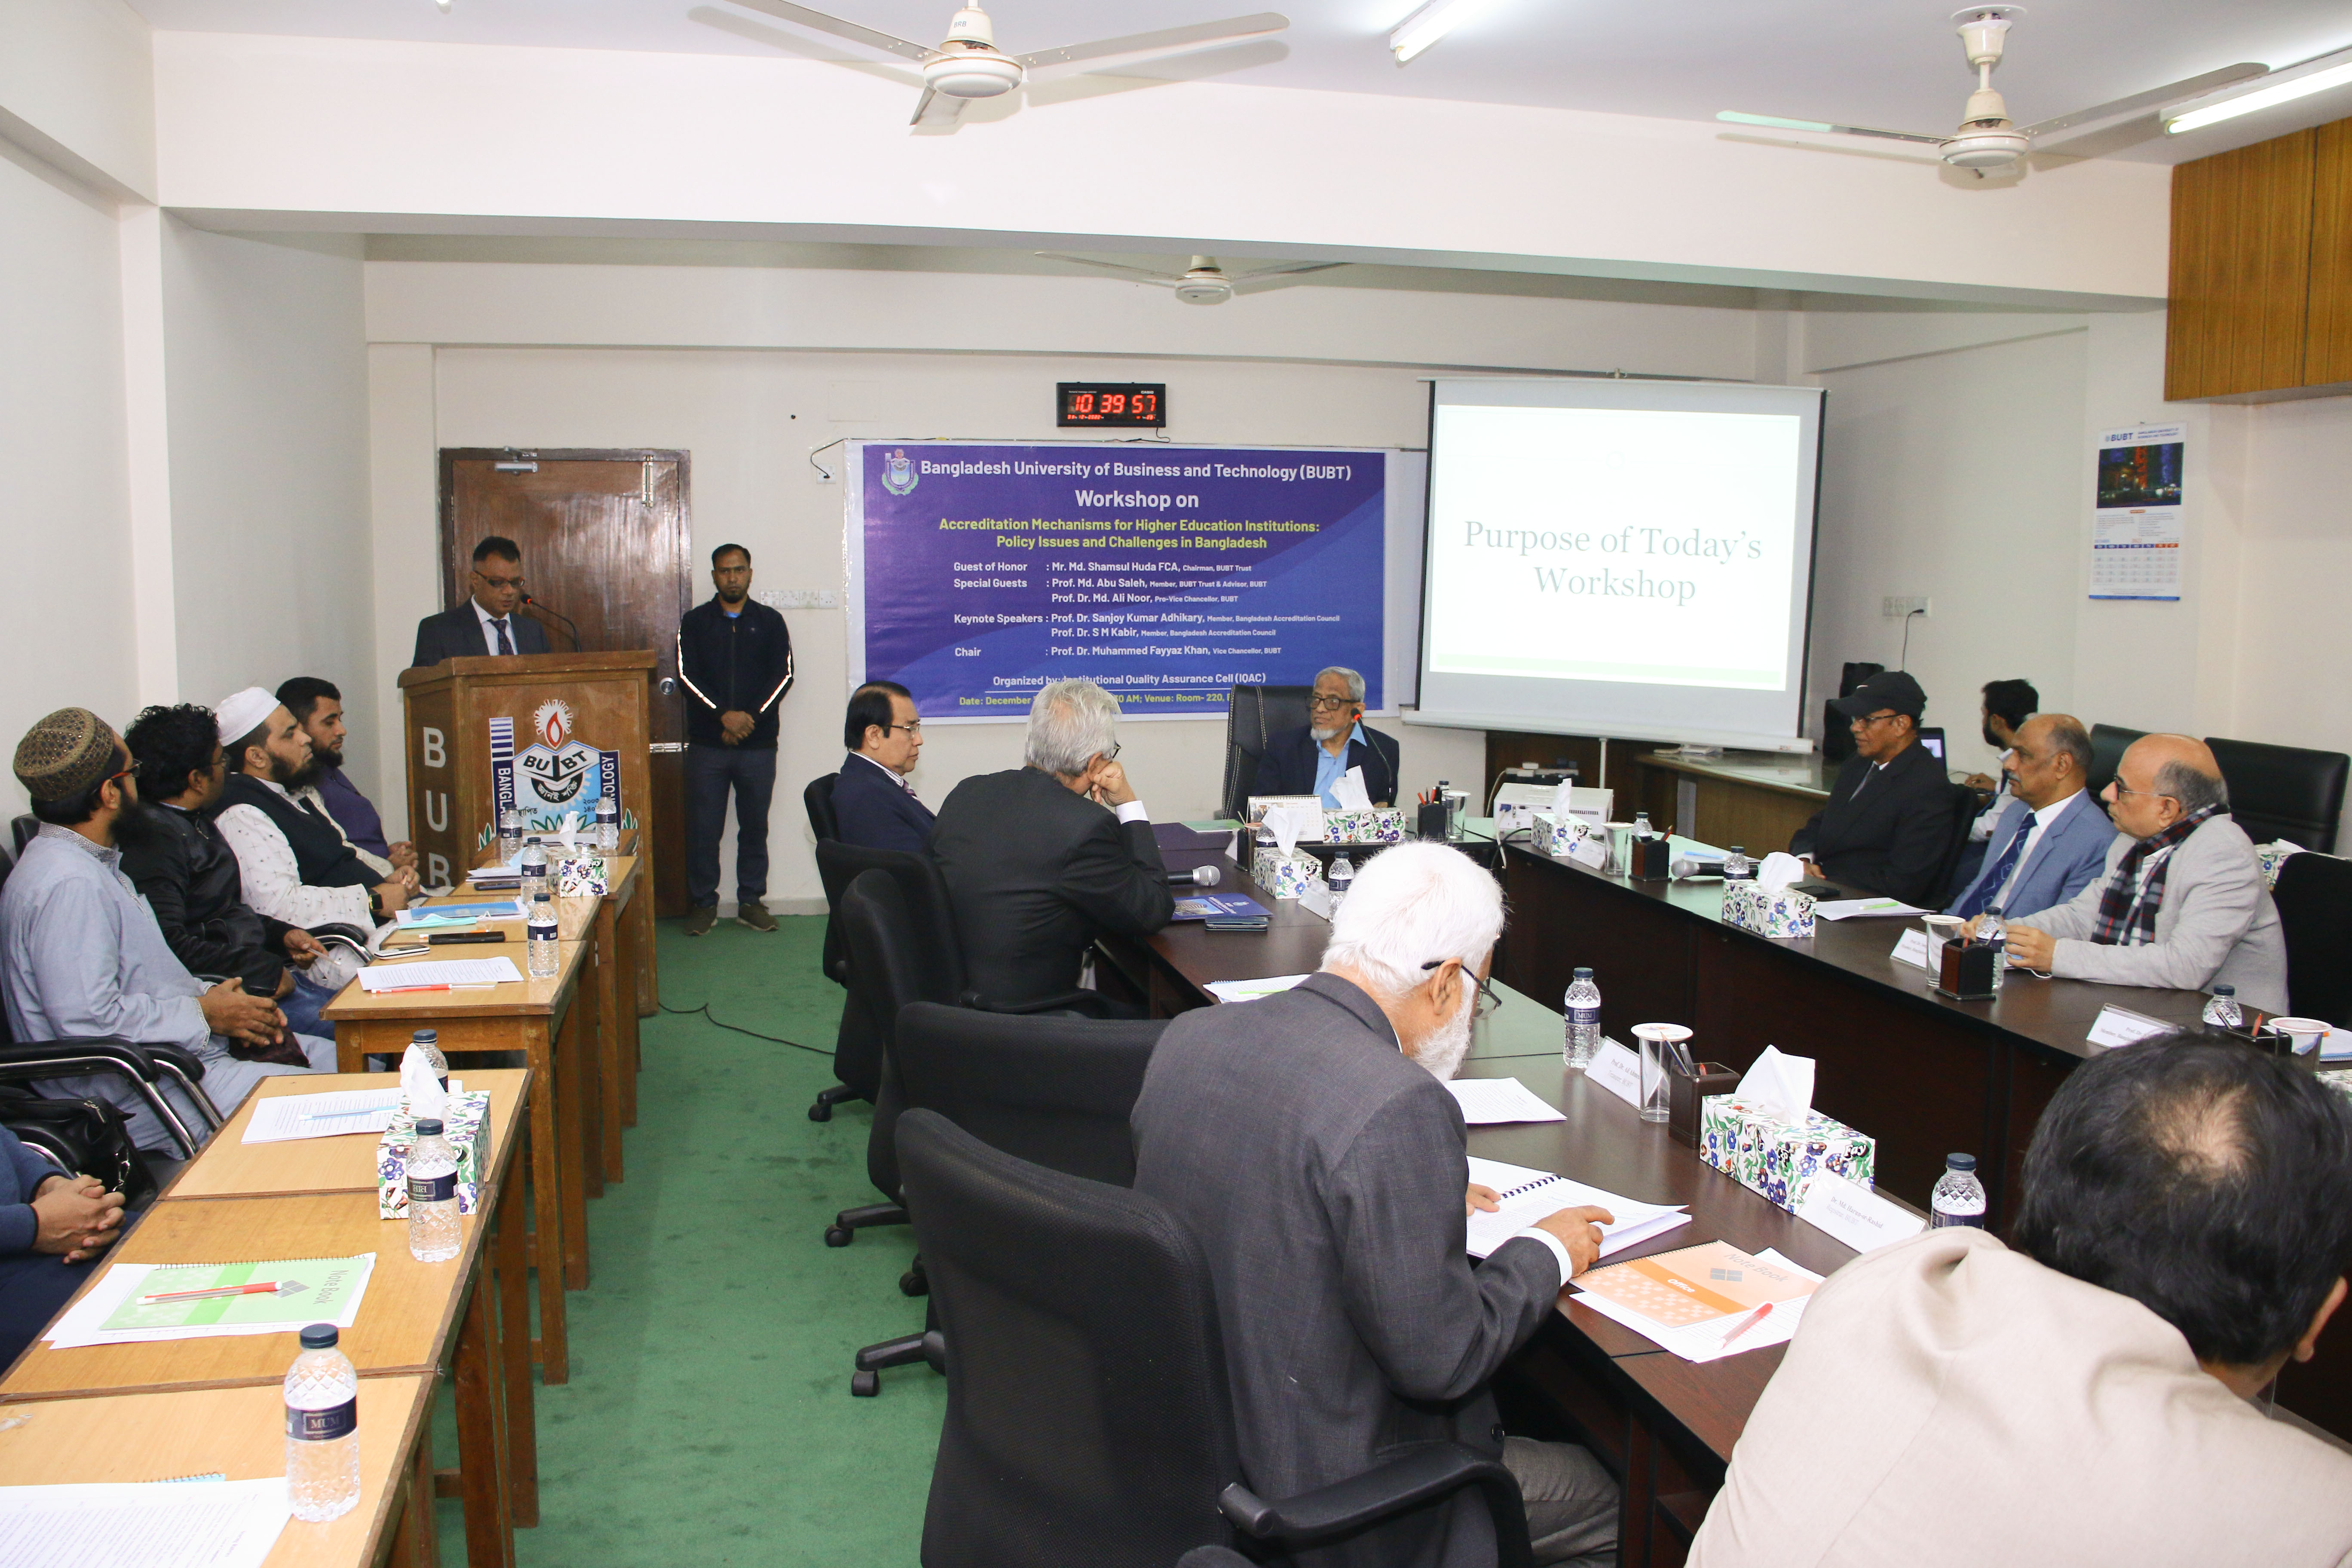 IQAC-BUBT Organized Workshop on “Accreditation Mechanisms of Higher Education Institutions: Policy Issues and Challenges in Bangladesh.”